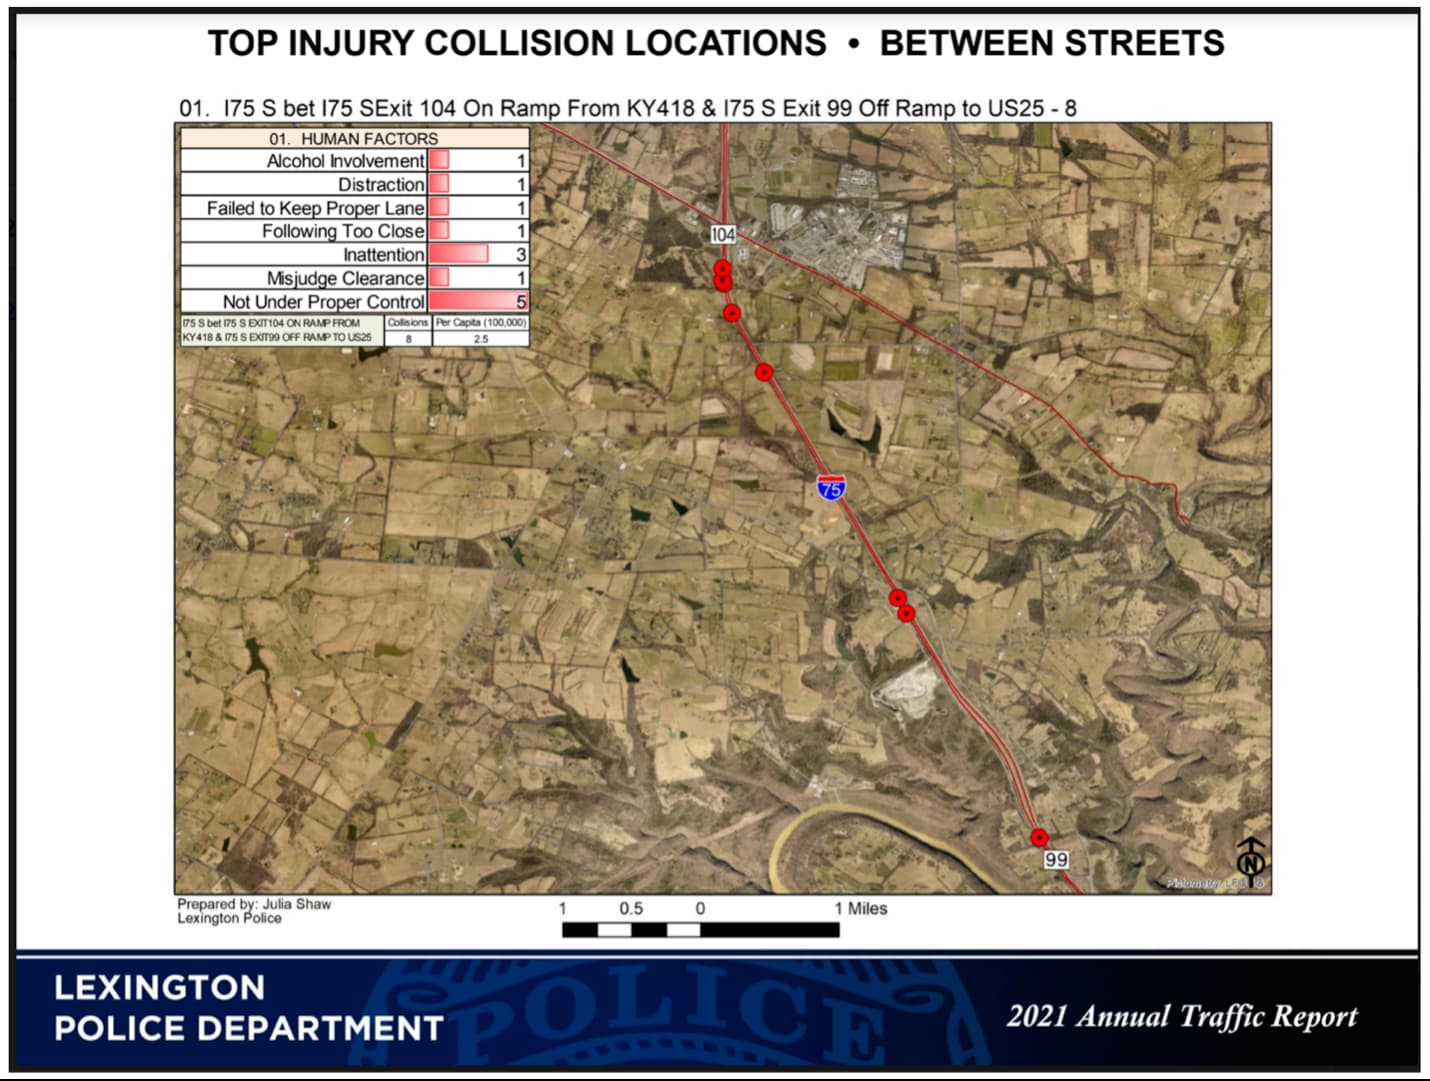 Top injury collision locations in Lexington, KY